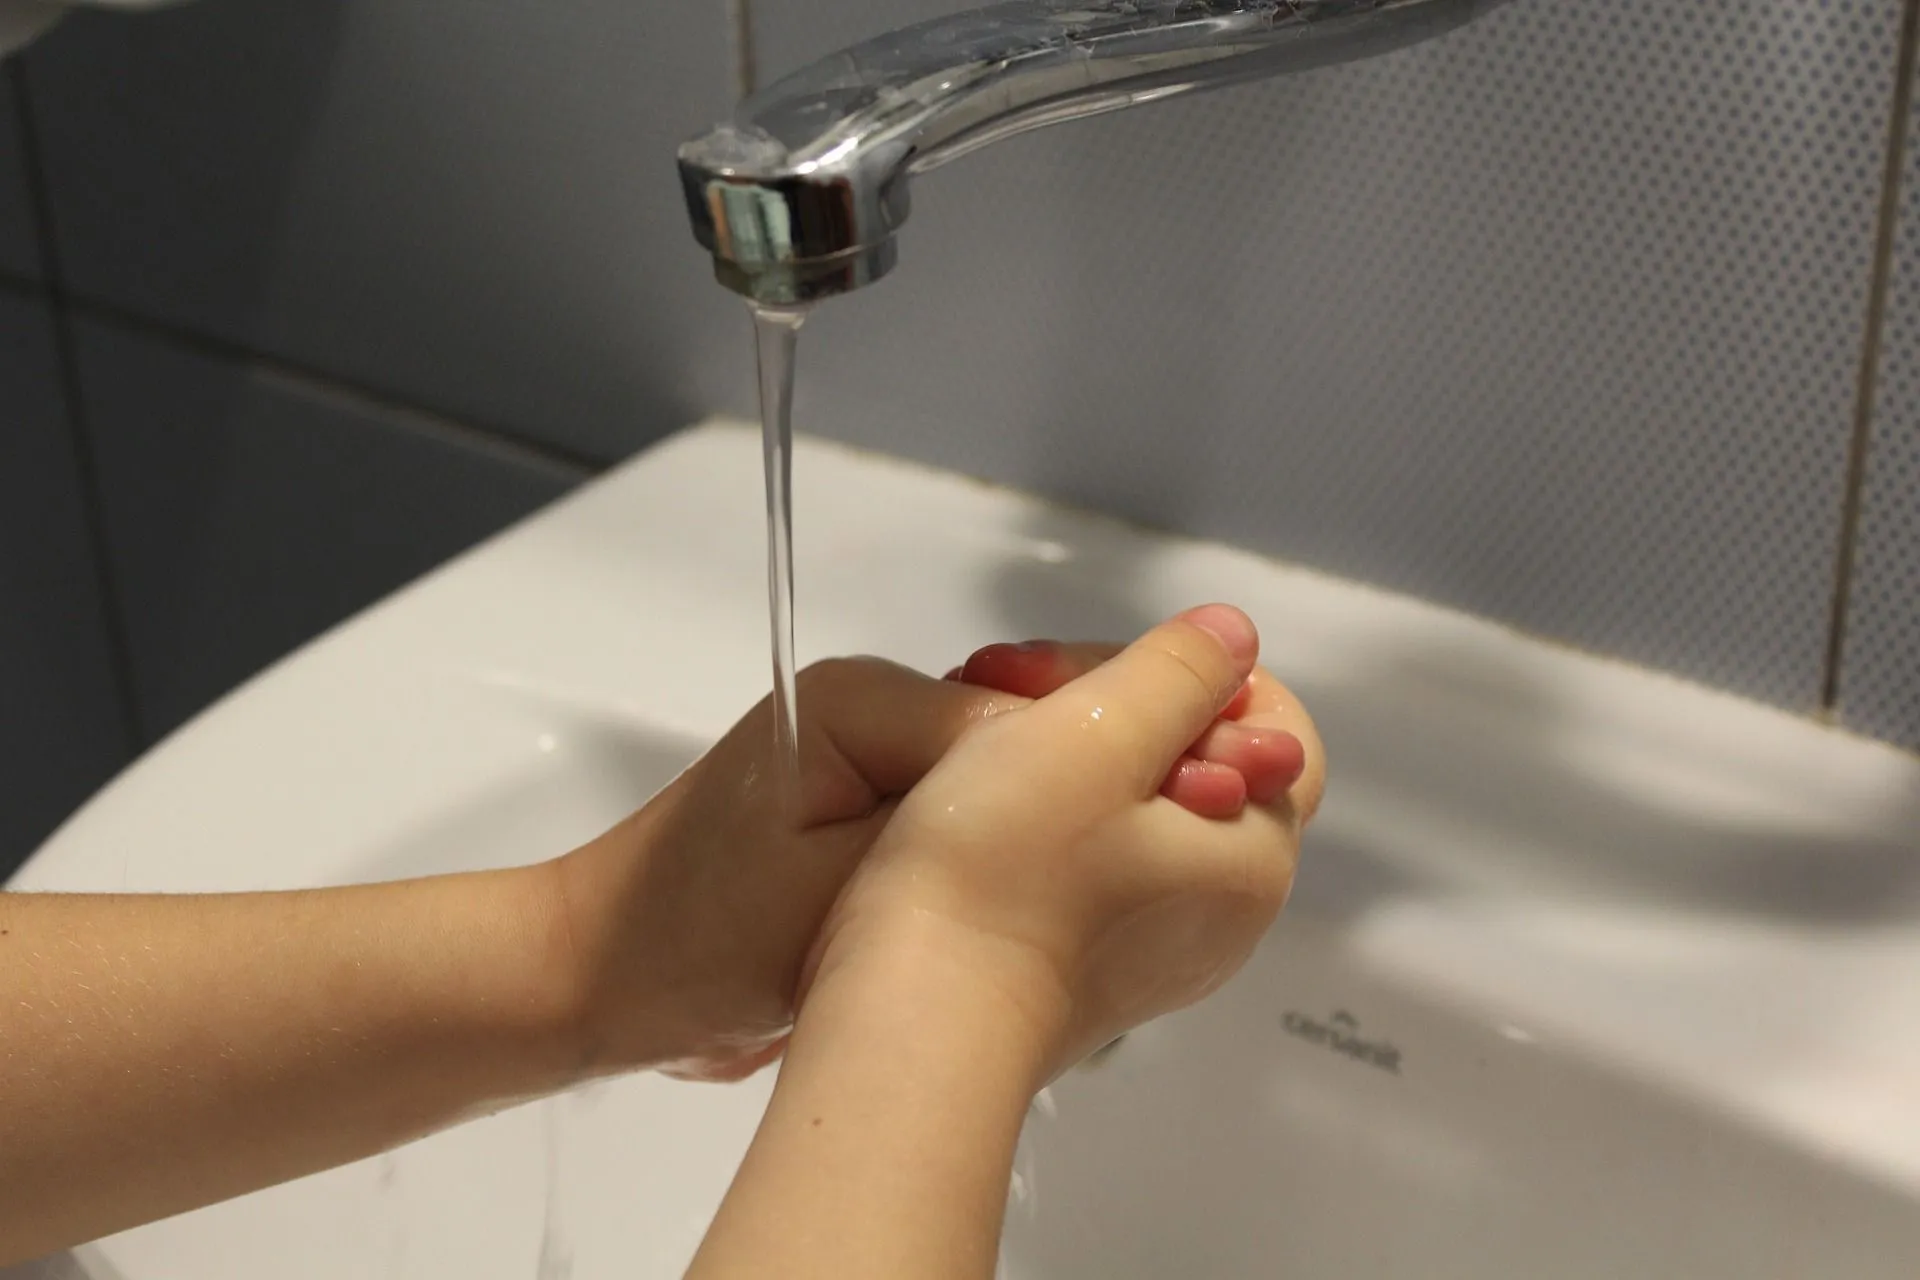 Not maintaining proper hand hygiene can lead to many serious diseases like diarrhea, hepatitis A, flu, common cold, bronchiolitis, and meningitis.